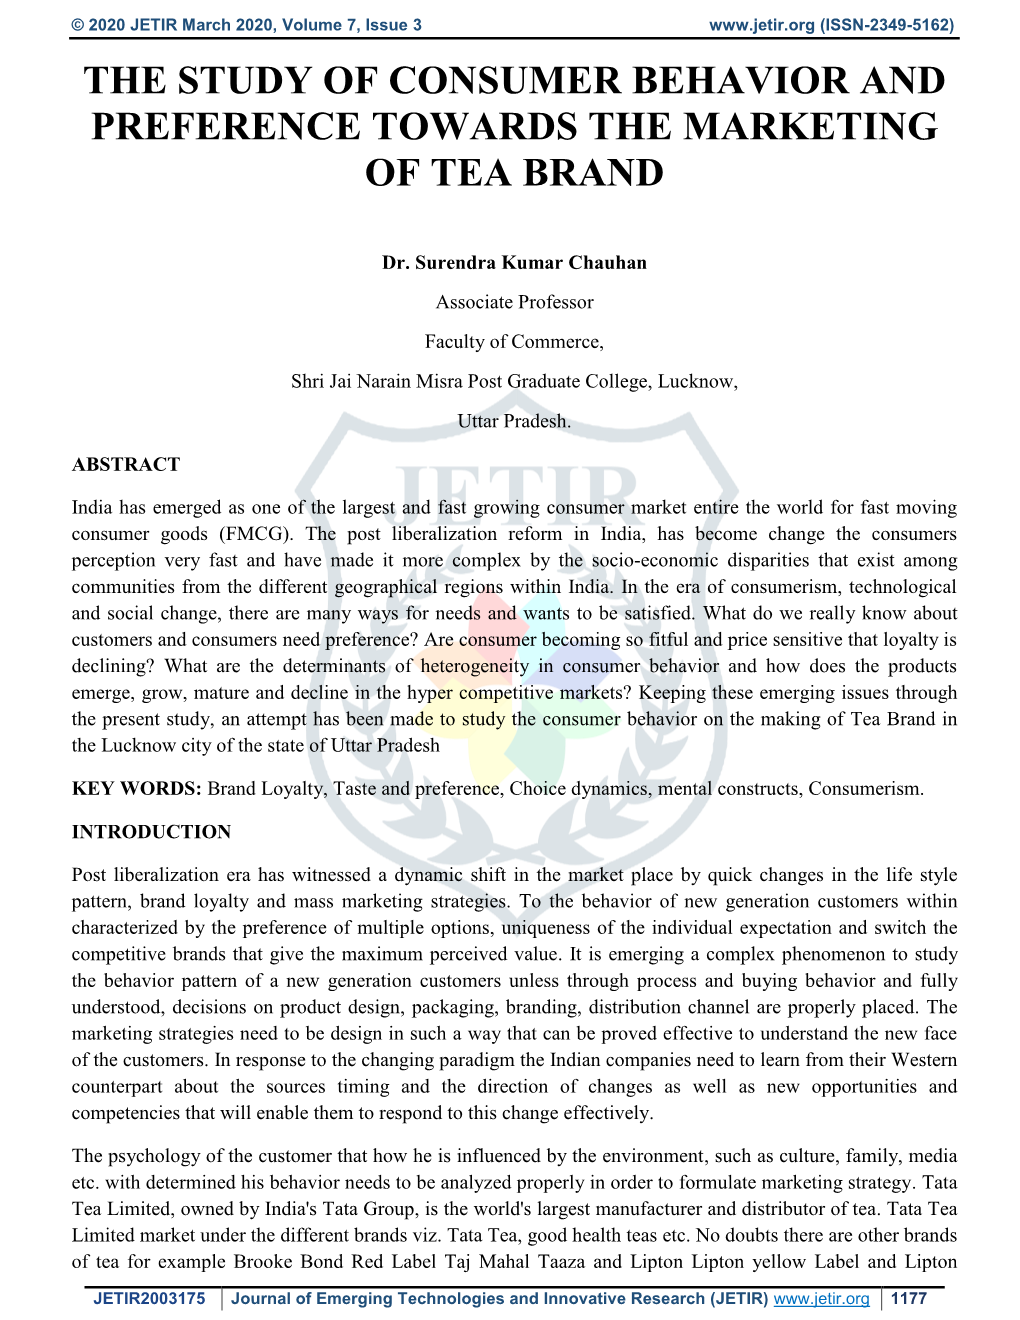 The Study of Consumer Behavior and Preference Towards the Marketing of Tea Brand